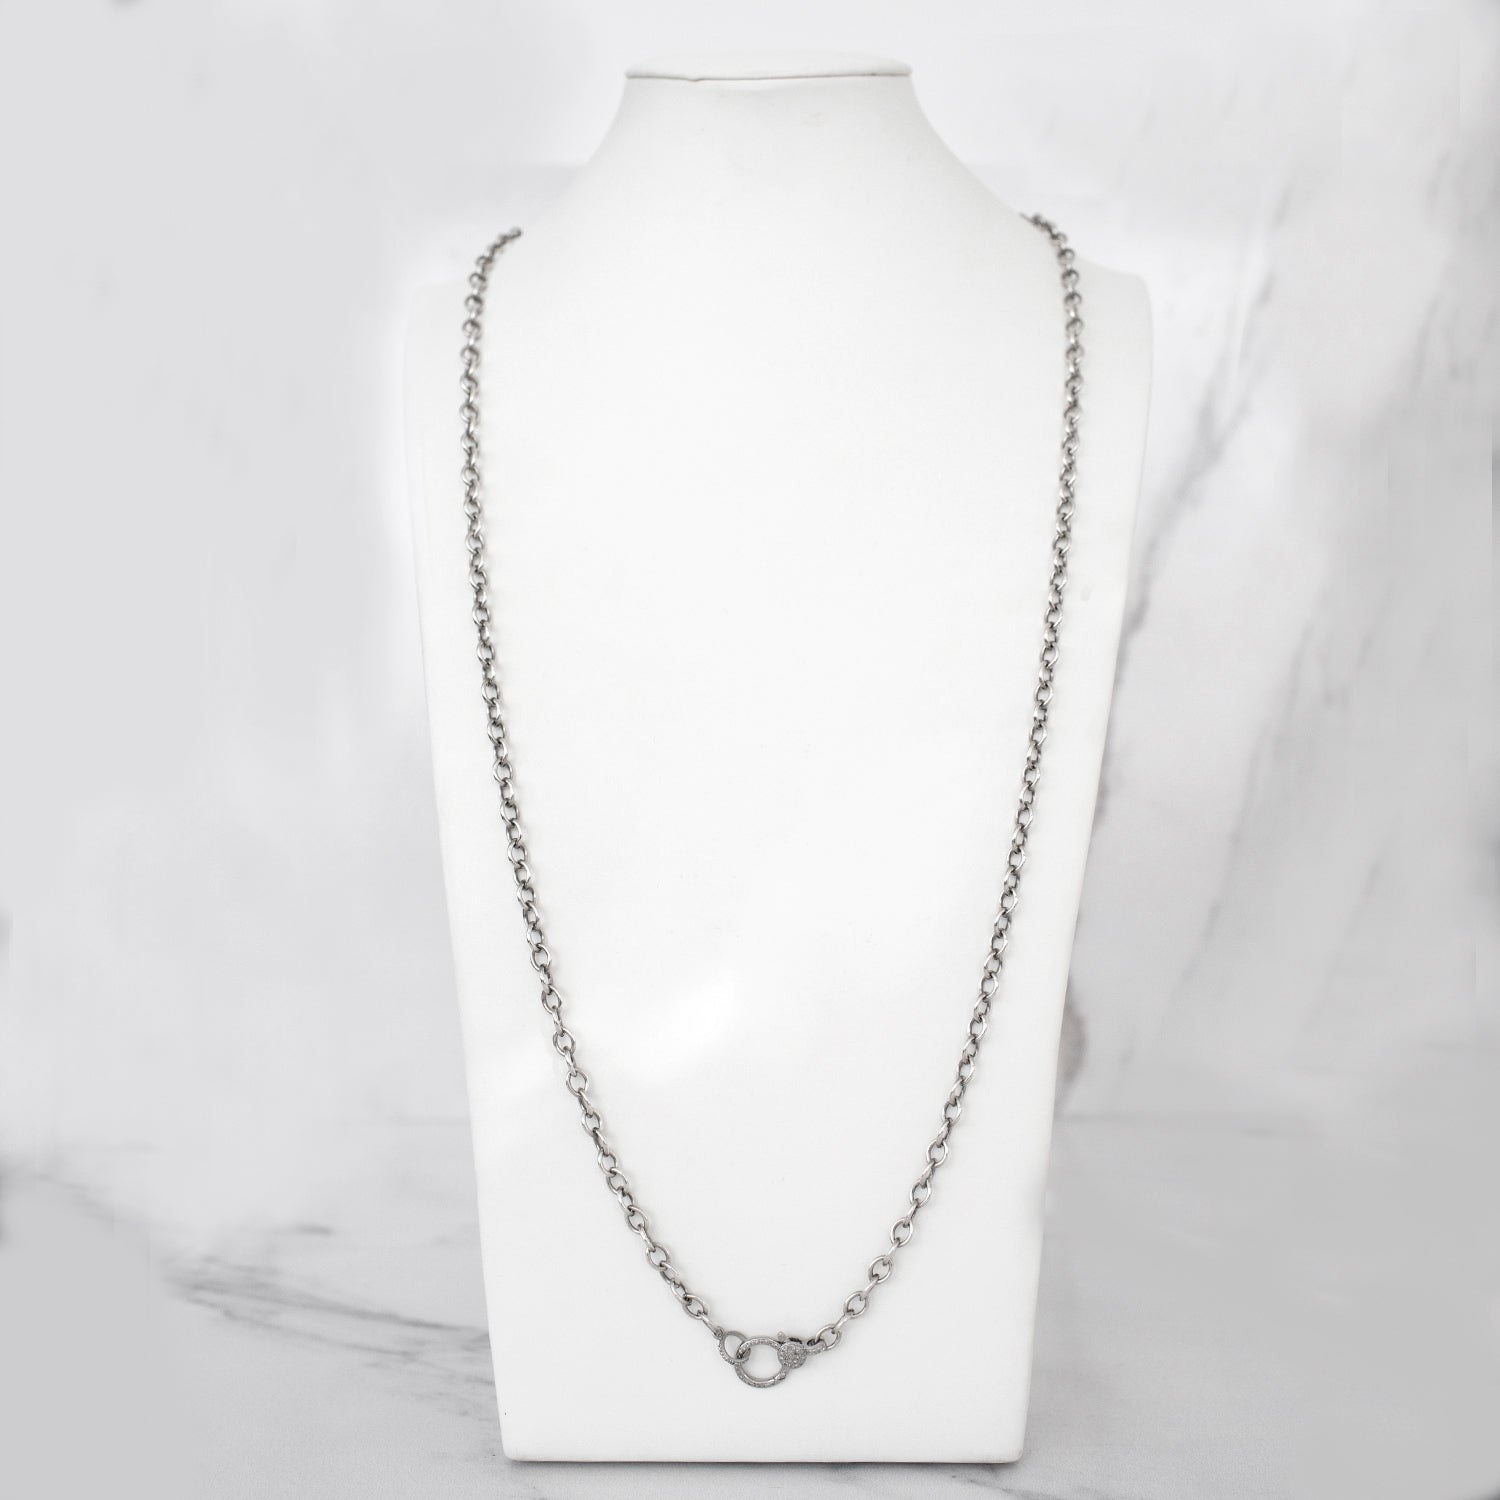 Long Link Chain Necklace with Diamond Claw Clasp NB000003 - TBird